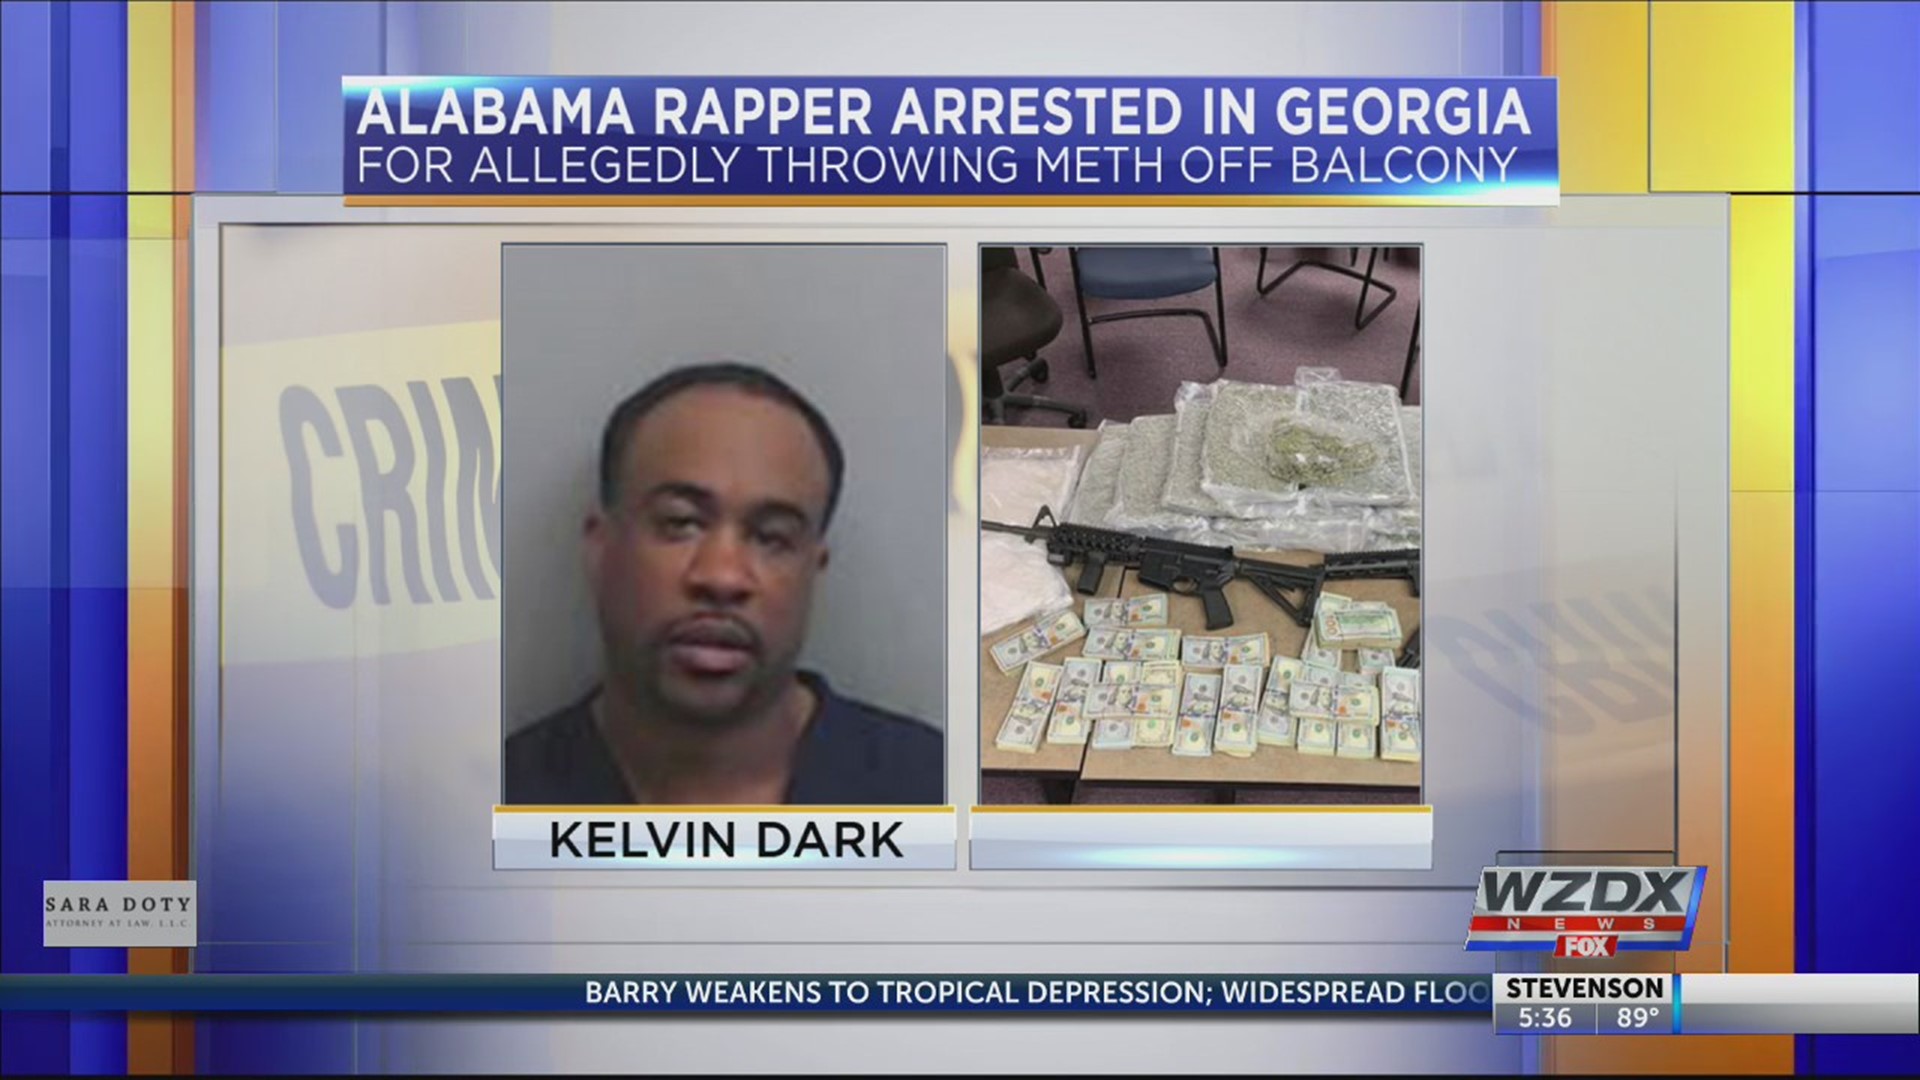 An Alabama rapper was arrested in Georgia last week on drug charges.